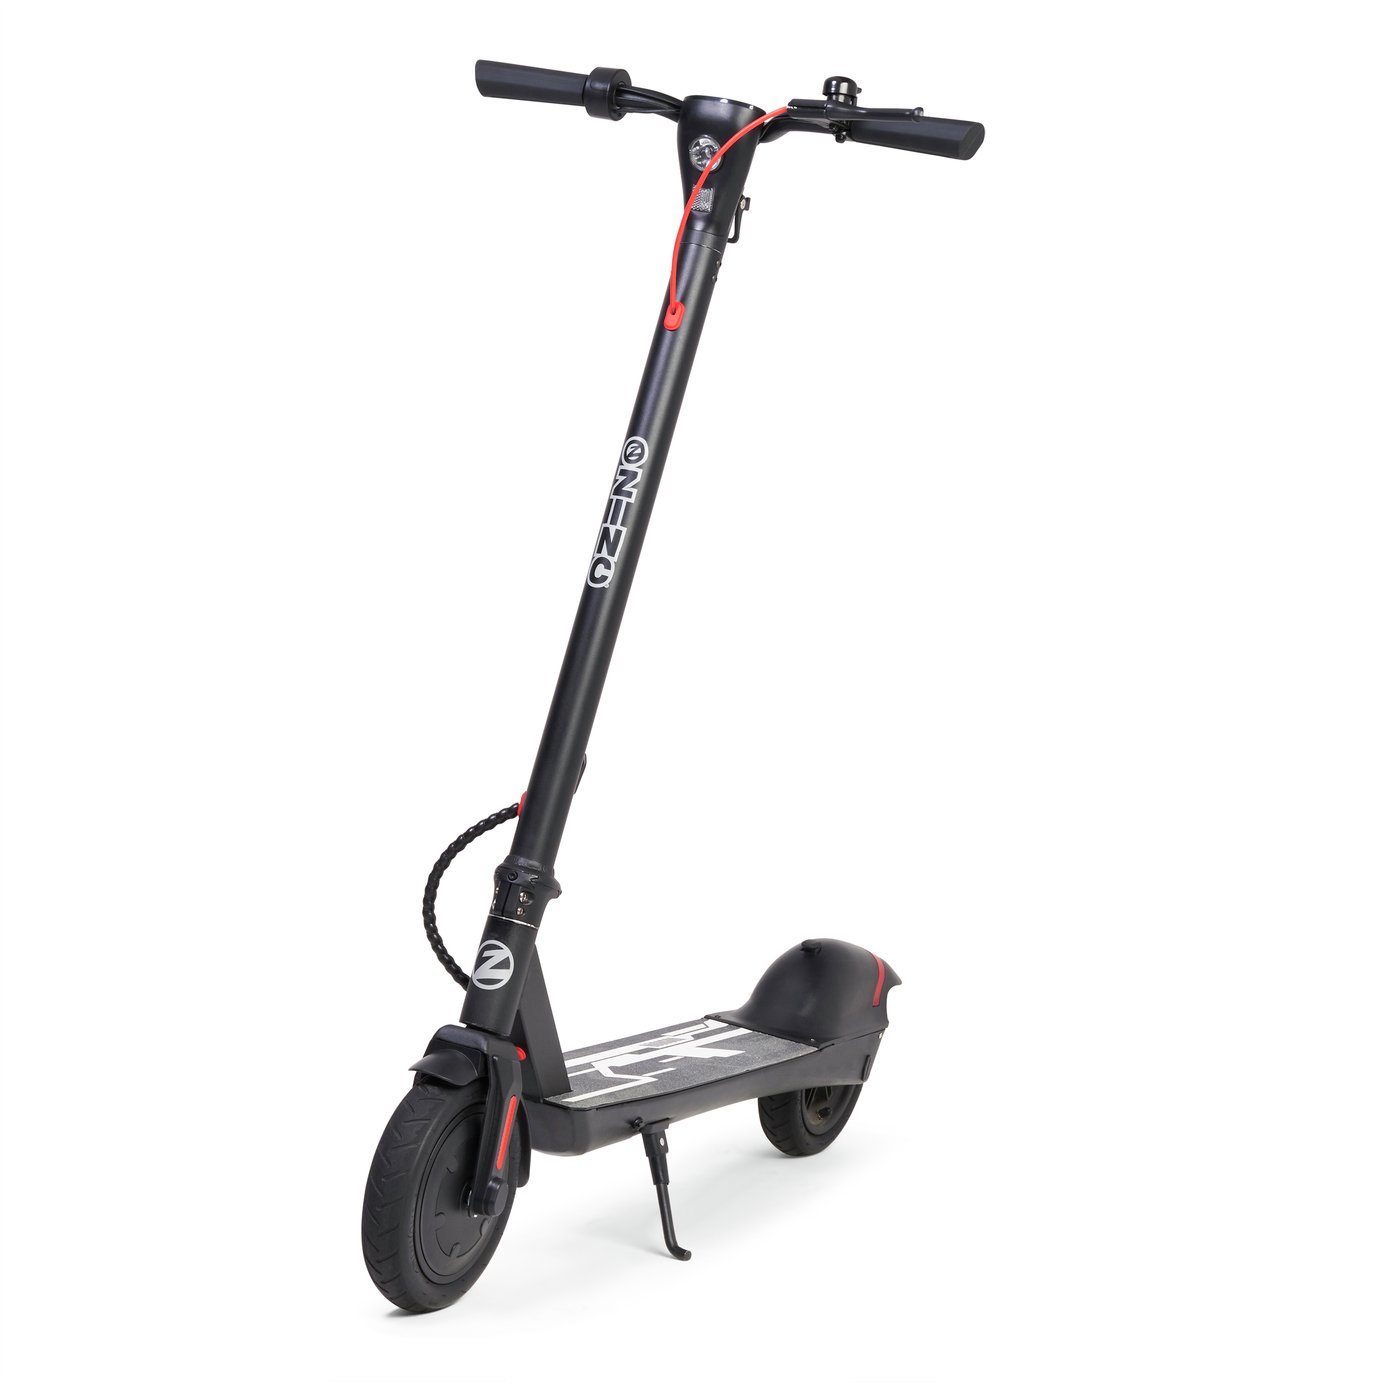 Zinc Eco Max Electric Scooter Review